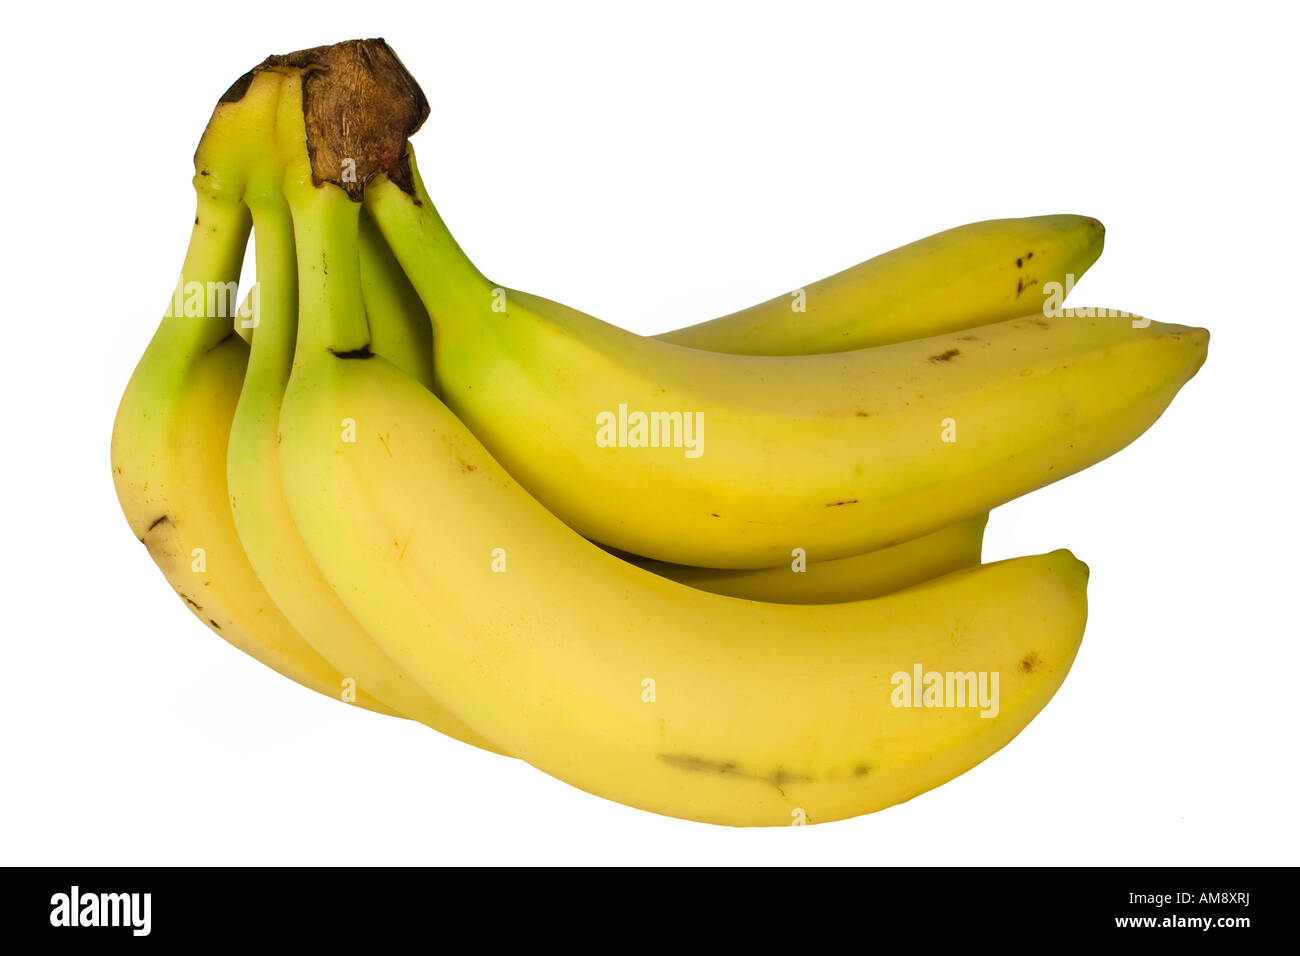 Cluster of ripe bananas isolated on white background Stock Photo